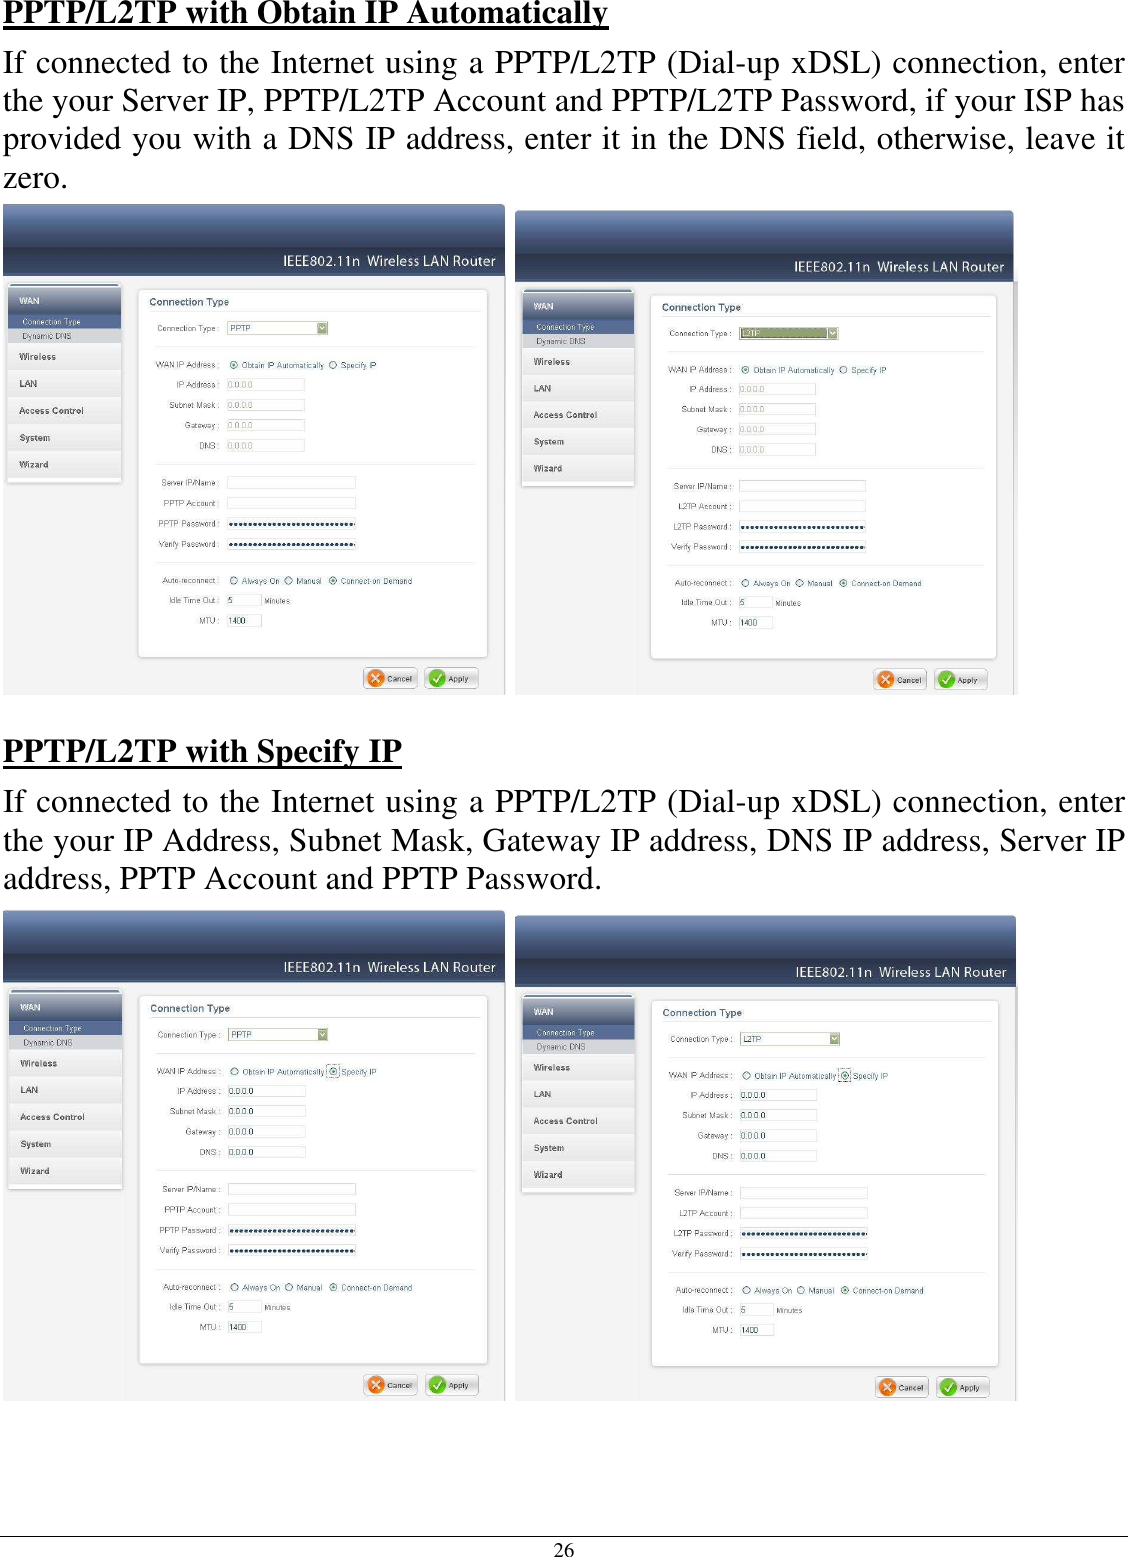 26 PPTP/L2TP with Obtain IP Automatically If connected to the Internet using a PPTP/L2TP (Dial-up xDSL) connection, enter the your Server IP, PPTP/L2TP Account and PPTP/L2TP Password, if your ISP has provided you with a DNS IP address, enter it in the DNS field, otherwise, leave it zero.      PPTP/L2TP with Specify IP If connected to the Internet using a PPTP/L2TP (Dial-up xDSL) connection, enter the your IP Address, Subnet Mask, Gateway IP address, DNS IP address, Server IP address, PPTP Account and PPTP Password.     